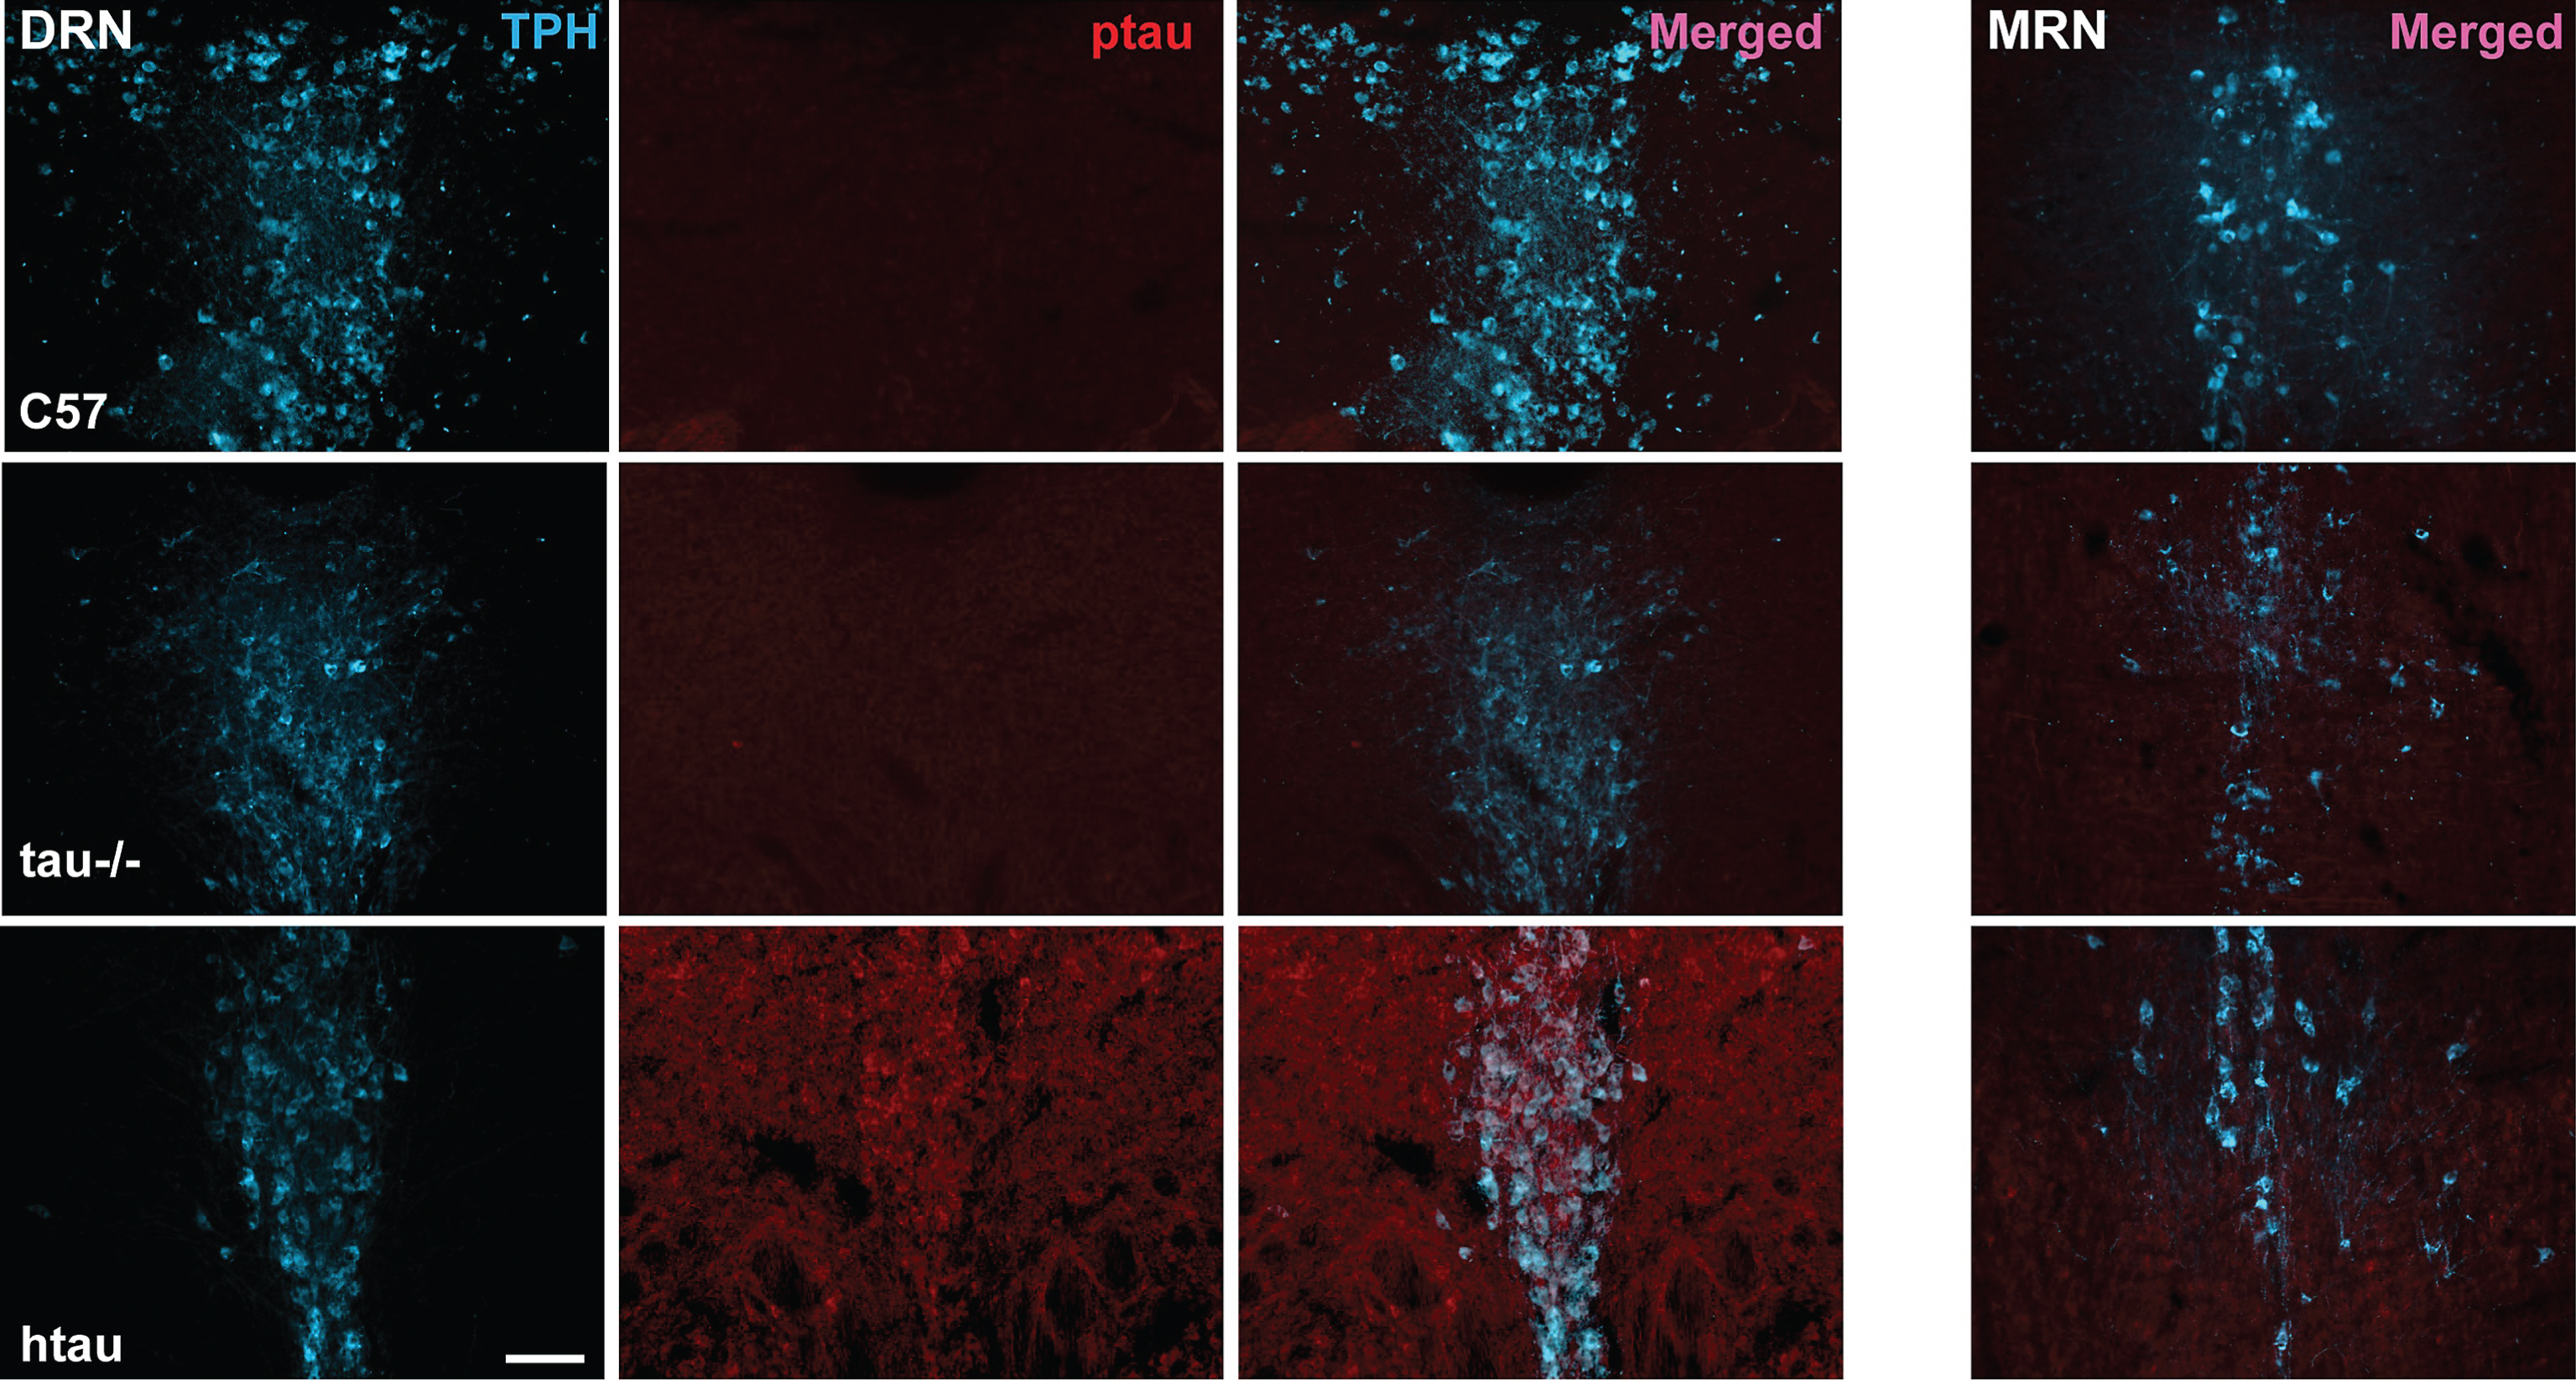 Phosphorylated tau (ptau) accumulation in trytophan hydroxylase (TPH)-positive cells of the DRN is evident in 4-month-old htau mice. Photomicrographs of immunofluorescent-stained DRN sections are shown in the first three columns for C57, tau-/-, and htau mice. All mice exhibit distinctly-labeled TPH cells; however, ptau-231 label is non-existent in C57 and tau-/- DRN. ptau-231 immunofluorescence is obvious in DRN sections of 4-month-old htau mice with substantial co-label of this marker in TPH-positive cells. Fourth column: Photomicrographs of merged channels of TPH and ptau for MRN from each respective animal. Note that ptau-231 fluorescence in htau MRN is weak compared to DRN. Scale bar = 100 μm.